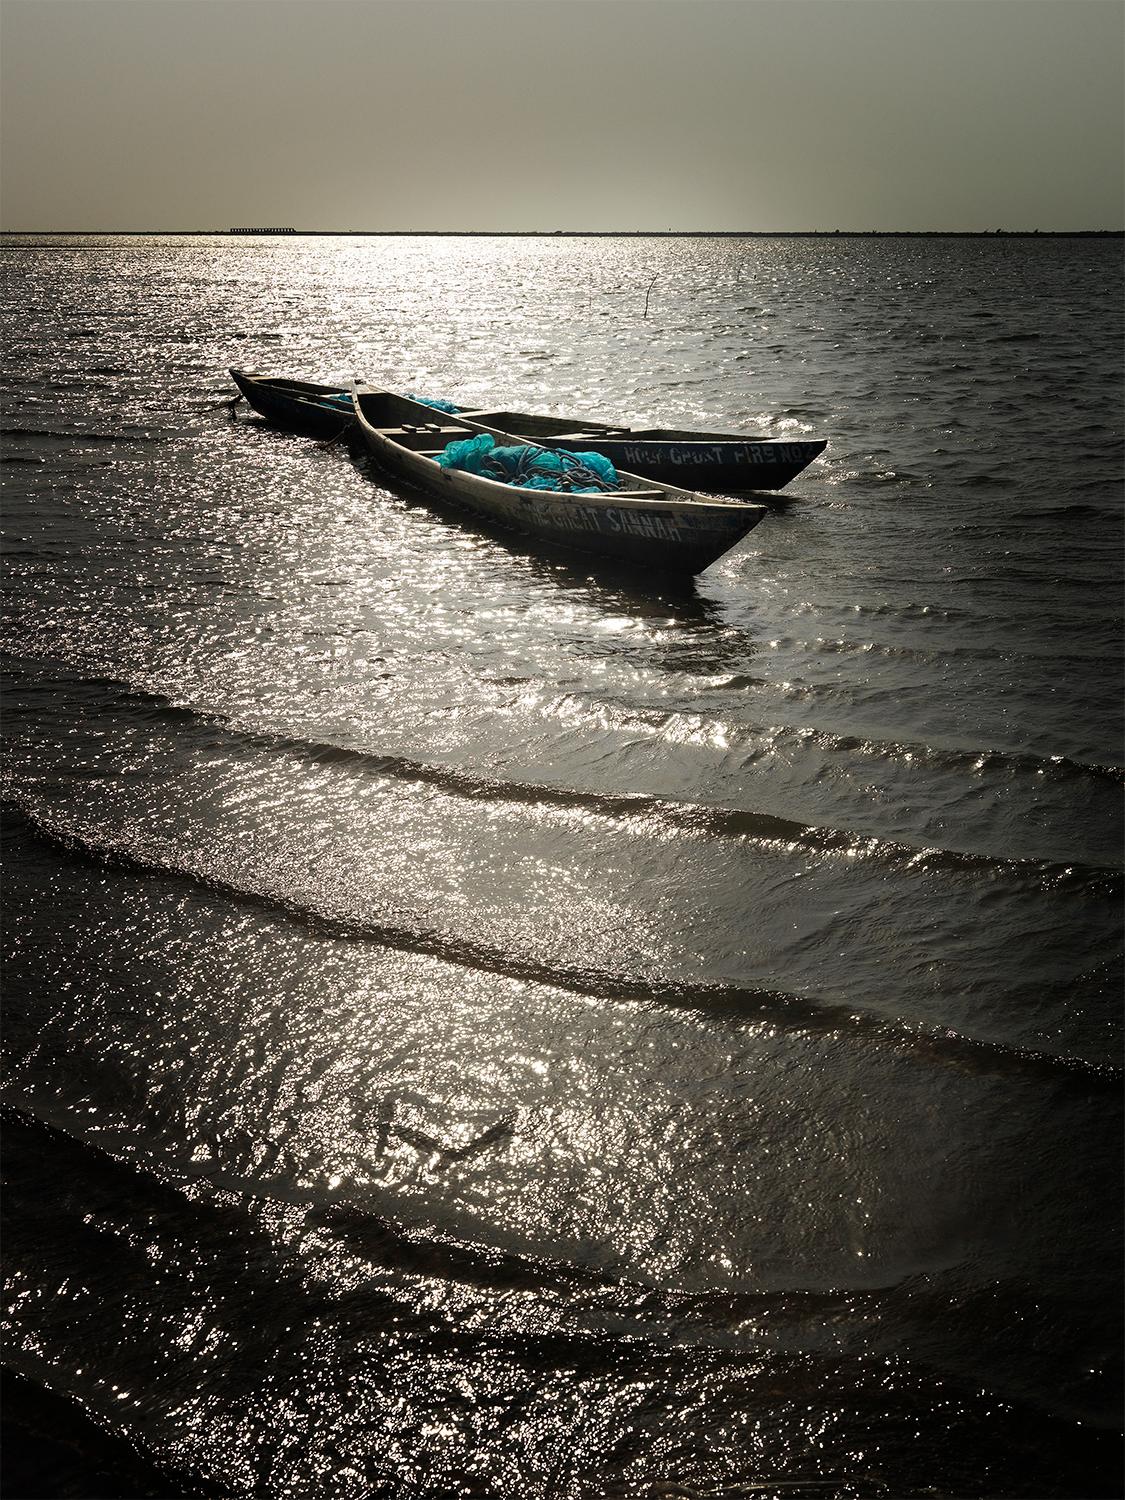 Edition of 25
signed and numbered by the artist

2 fishing boats drifting on the sea in Ghana. The water shimmers golden in the sunset.

JJK is a pseudonym for one of the world's most successful photo artists.
In his series "Always in my mind", he